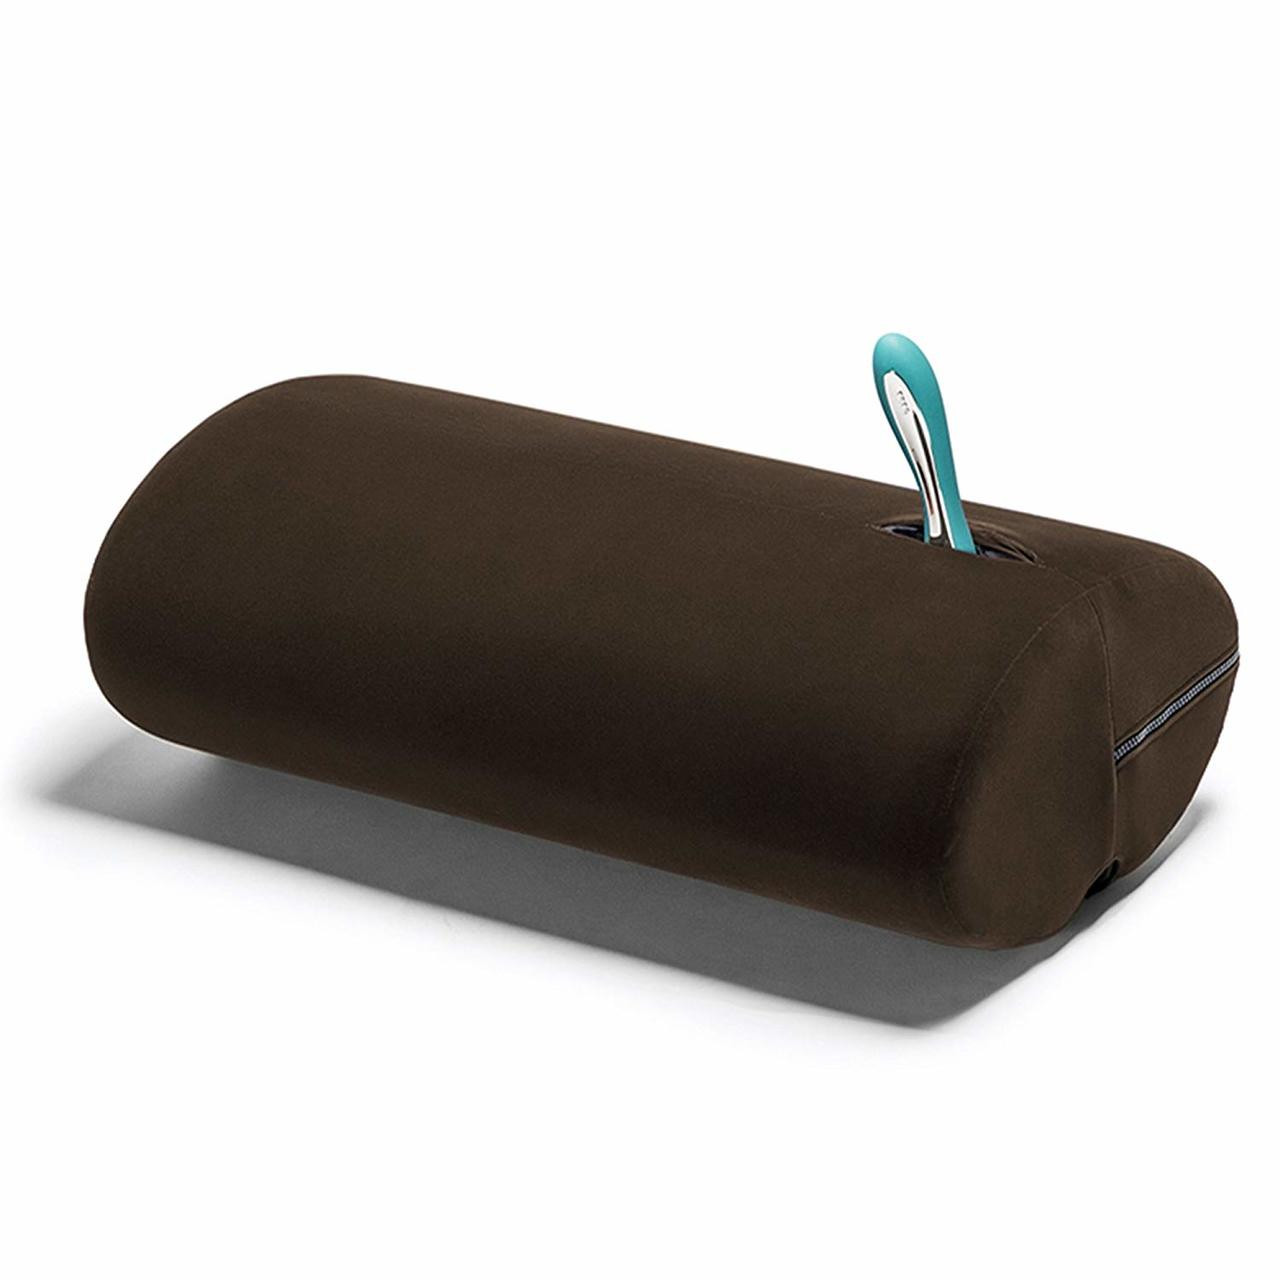 Buy the Wing Dual Sex Toy Mount and Intimate Positioning Cushion Pillow in Velvish Espresso Brown - photo